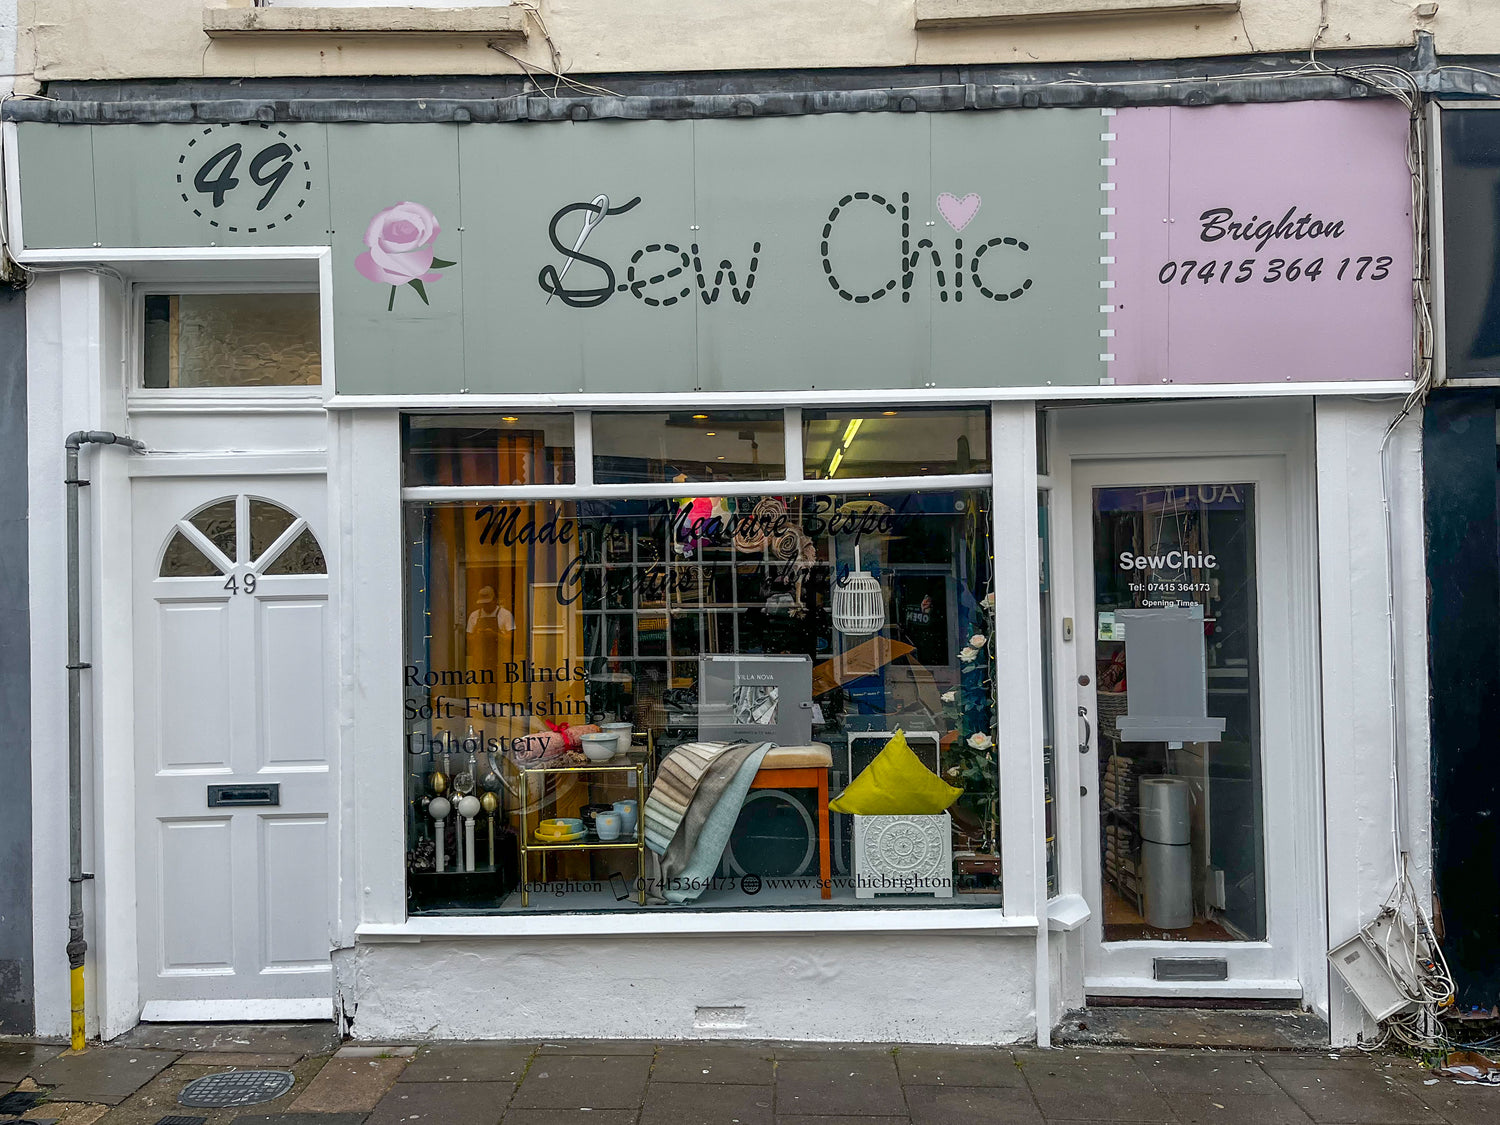 Sew Chic Interiors | Shop Front in Brighton and Hove | www.sewchicinteriors.co.uk